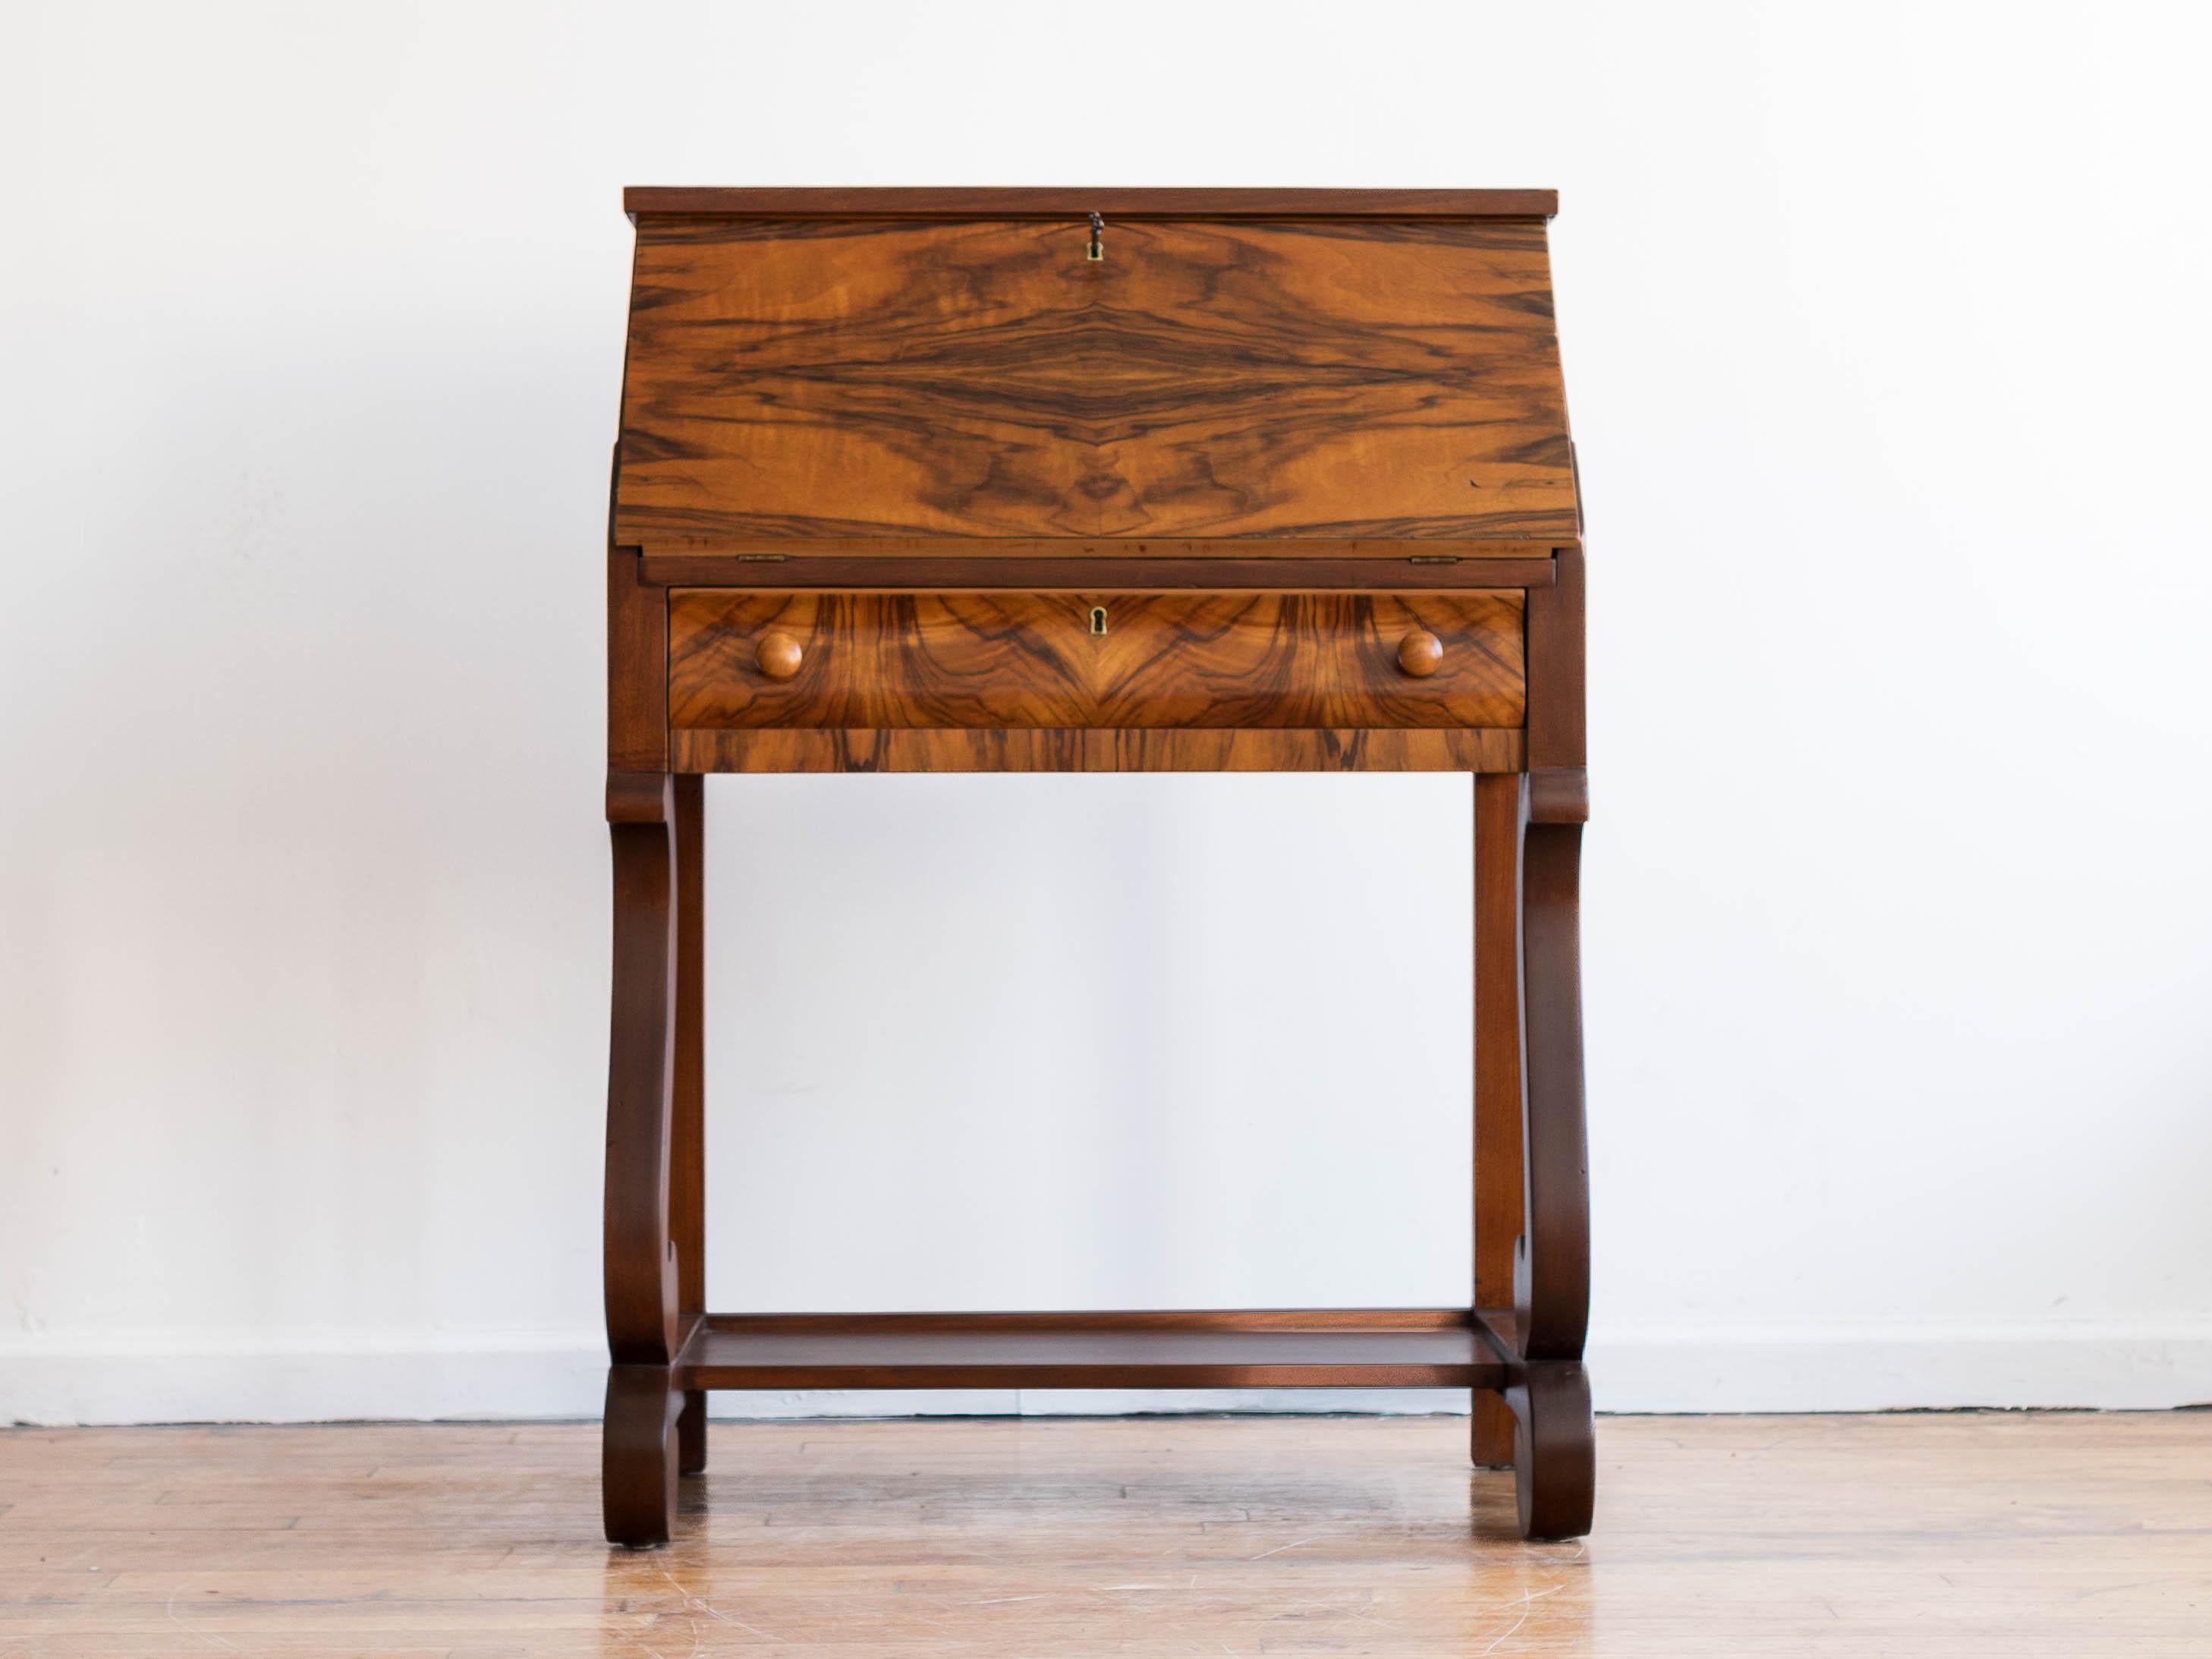 28” x 15.5” x 38.5”H; desk height 28”

Gorgeous Empire-style rosewood secretary desk from the turn of the century with Biedermeier influences. 

• four-way matched rosewood veneer 
• single center drawer
• built in cubbies with a second smaller